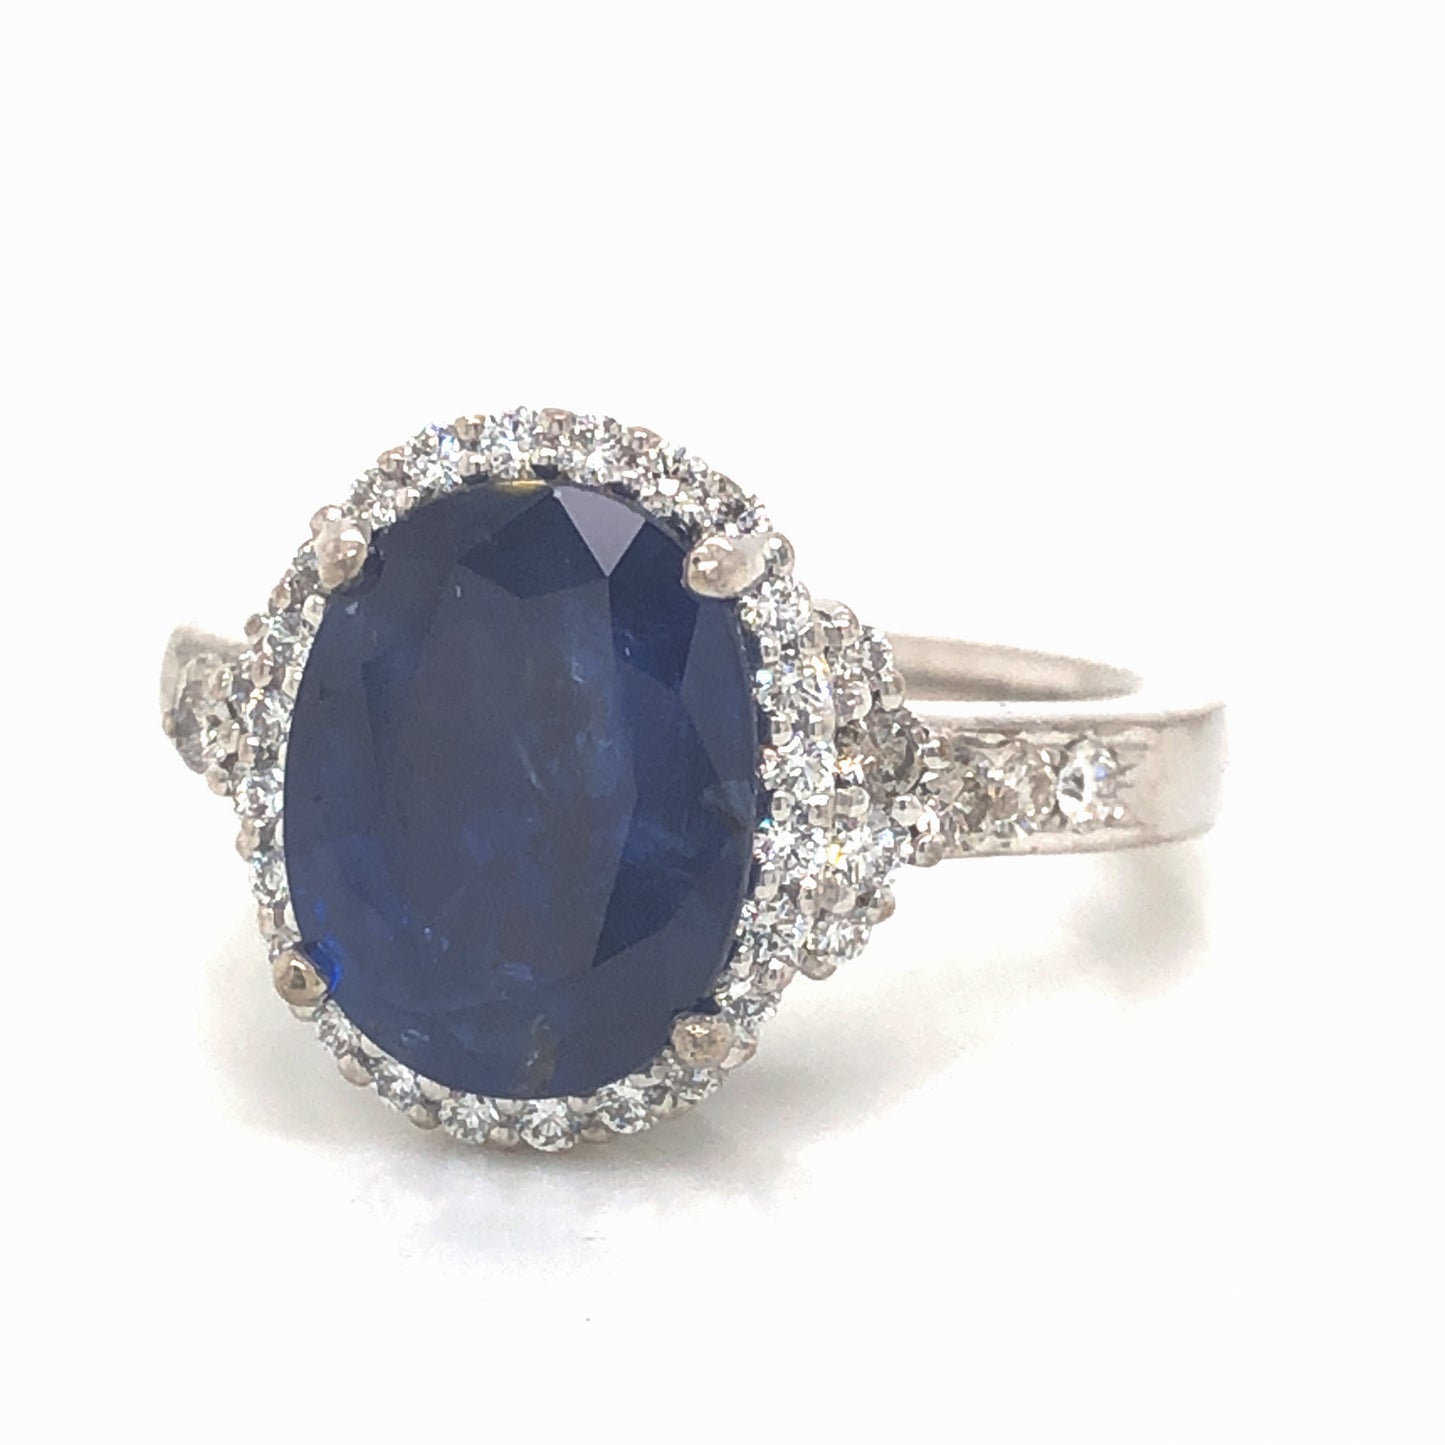 4.15 Oval Sapphire & Diamond Engagement Ring in 18k